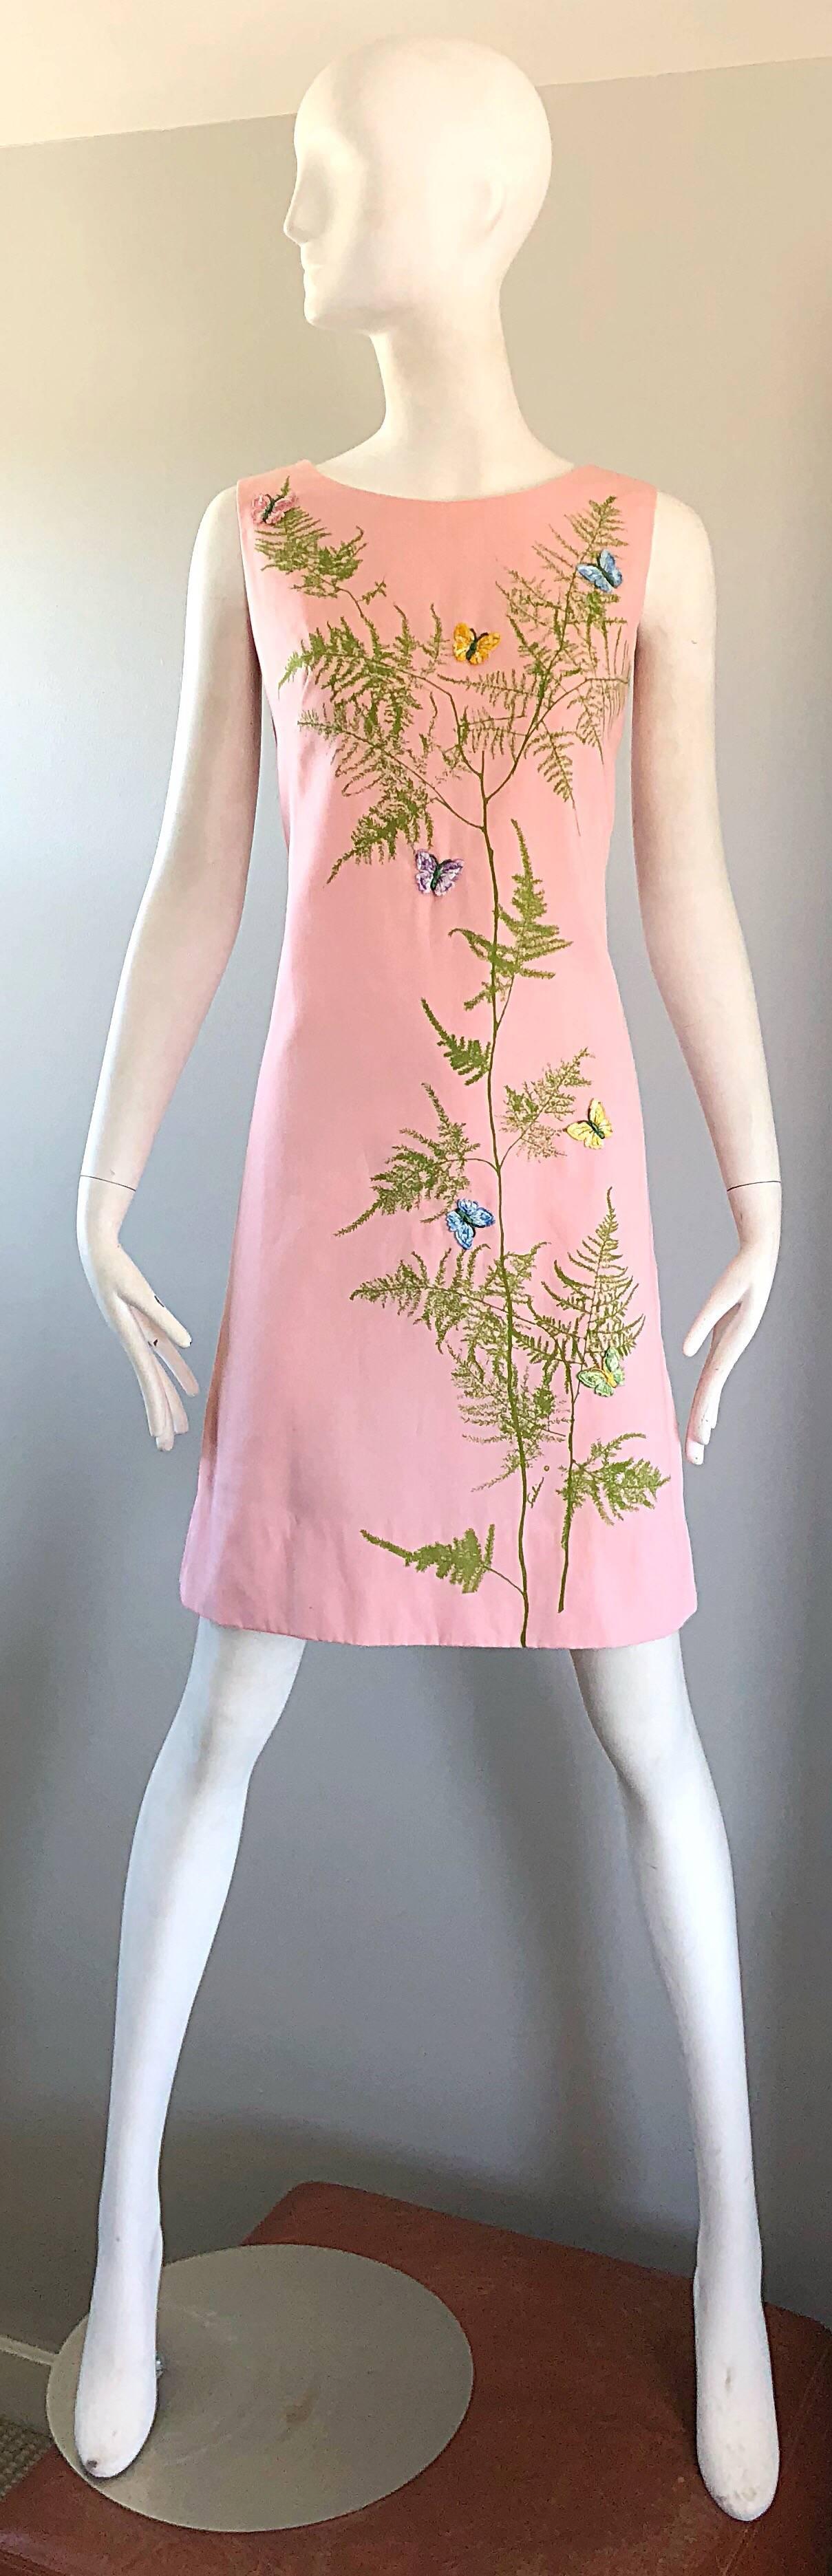 Chic 1960s Pale Pink Trees + Embrodiered Butterflies Novelty Vintage Shift Dress 8